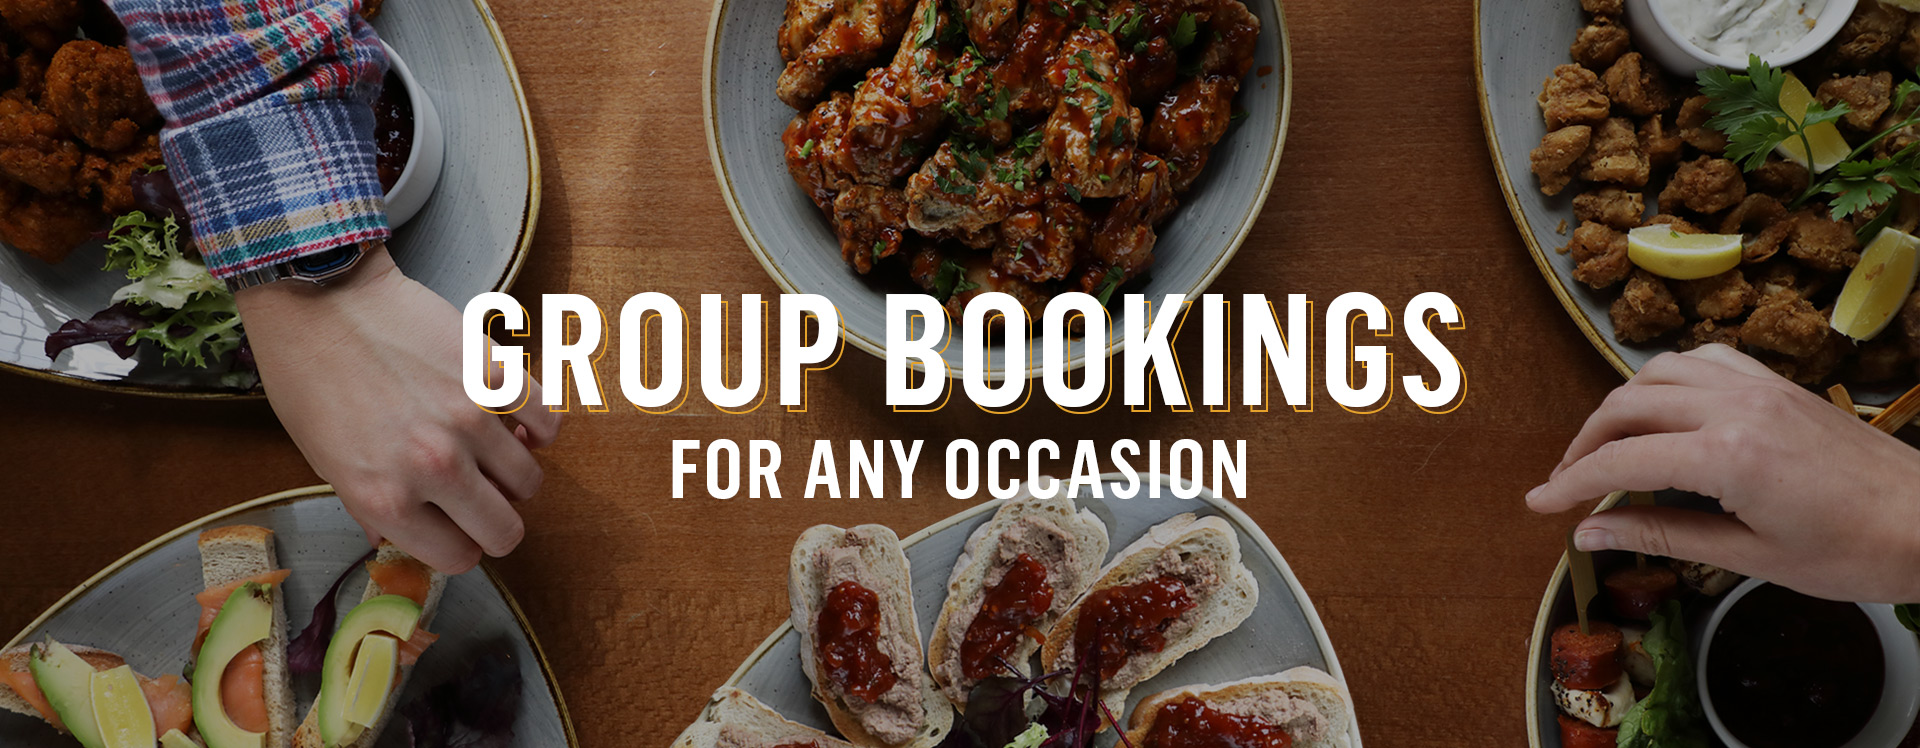 Group Bookings at Marquis Of Granby, Rathbone Street